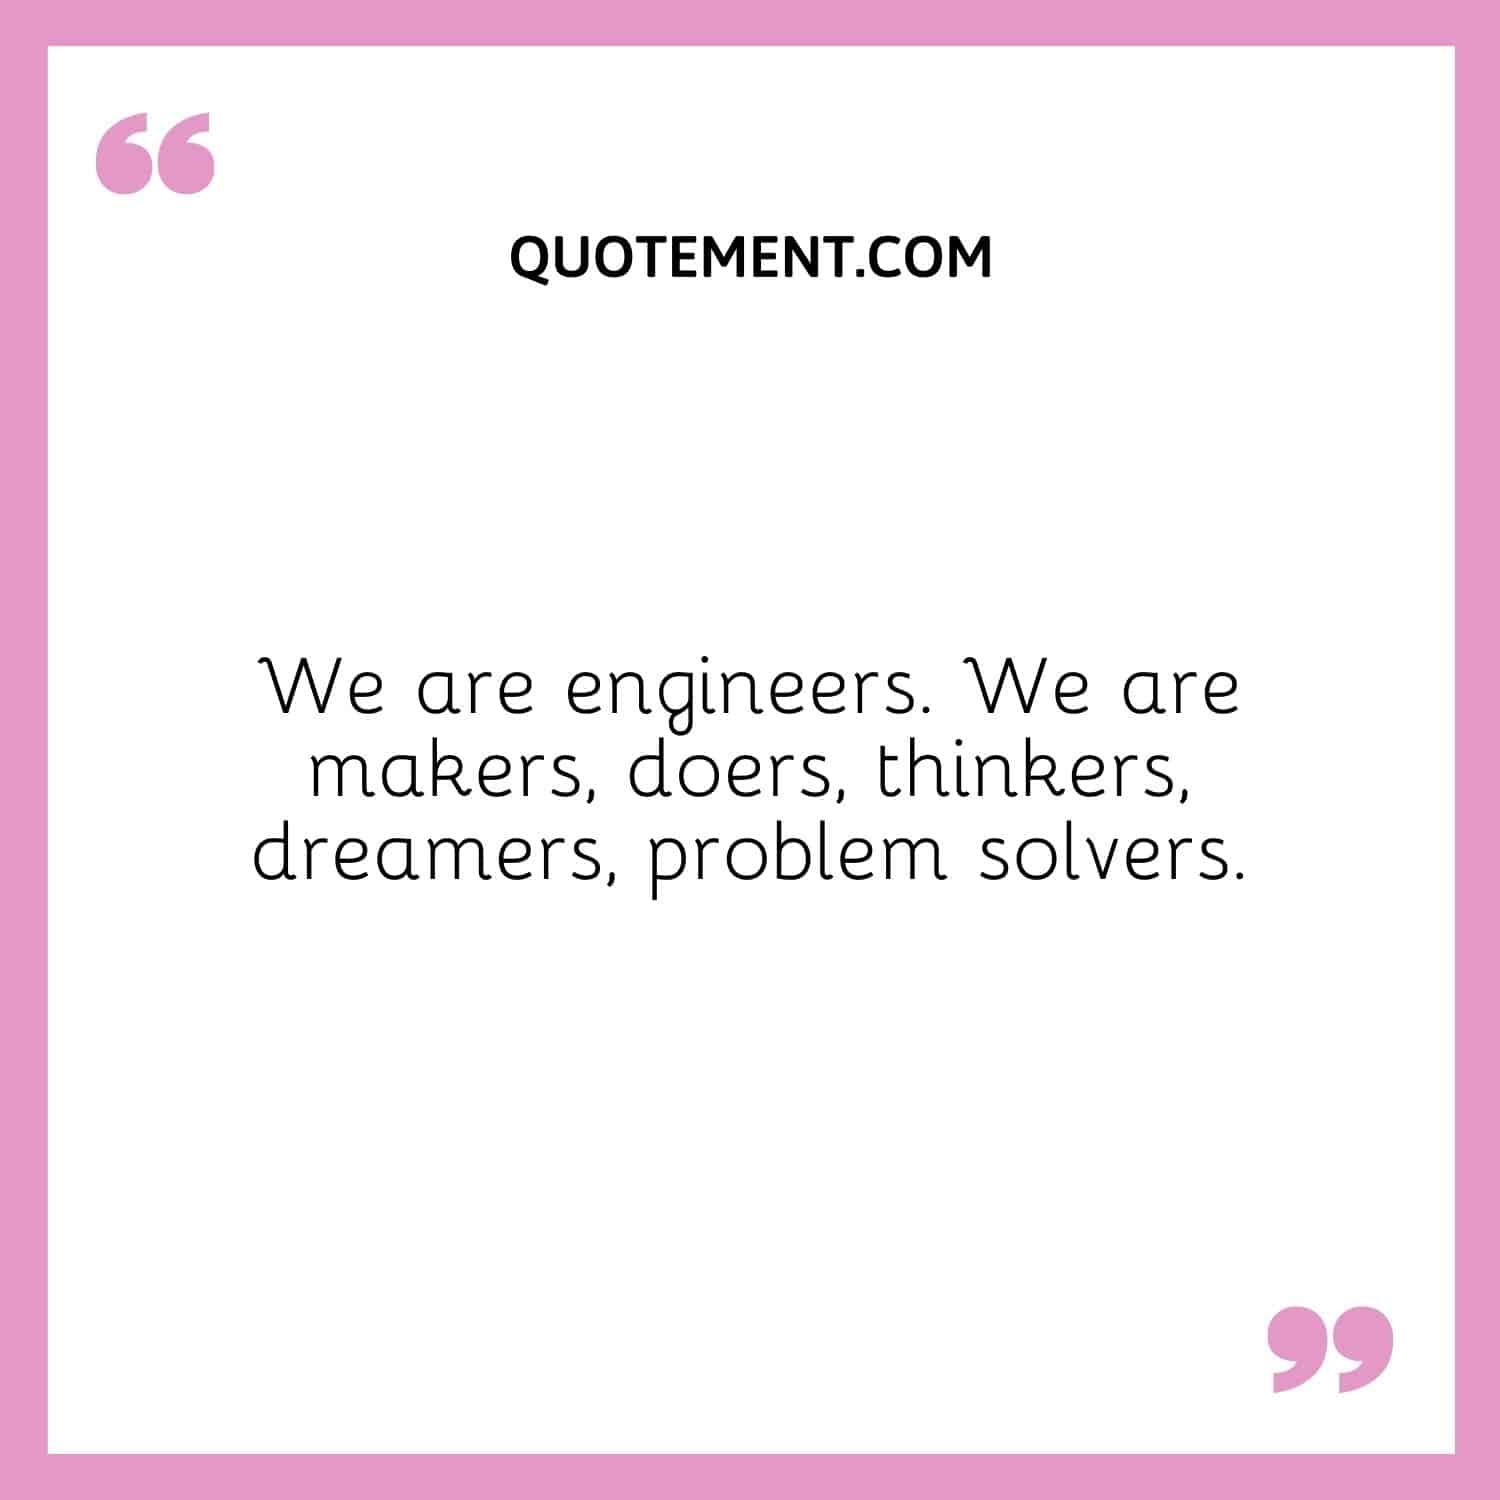 We are engineers. We are makers, doers, thinkers, dreamers, problem solvers.